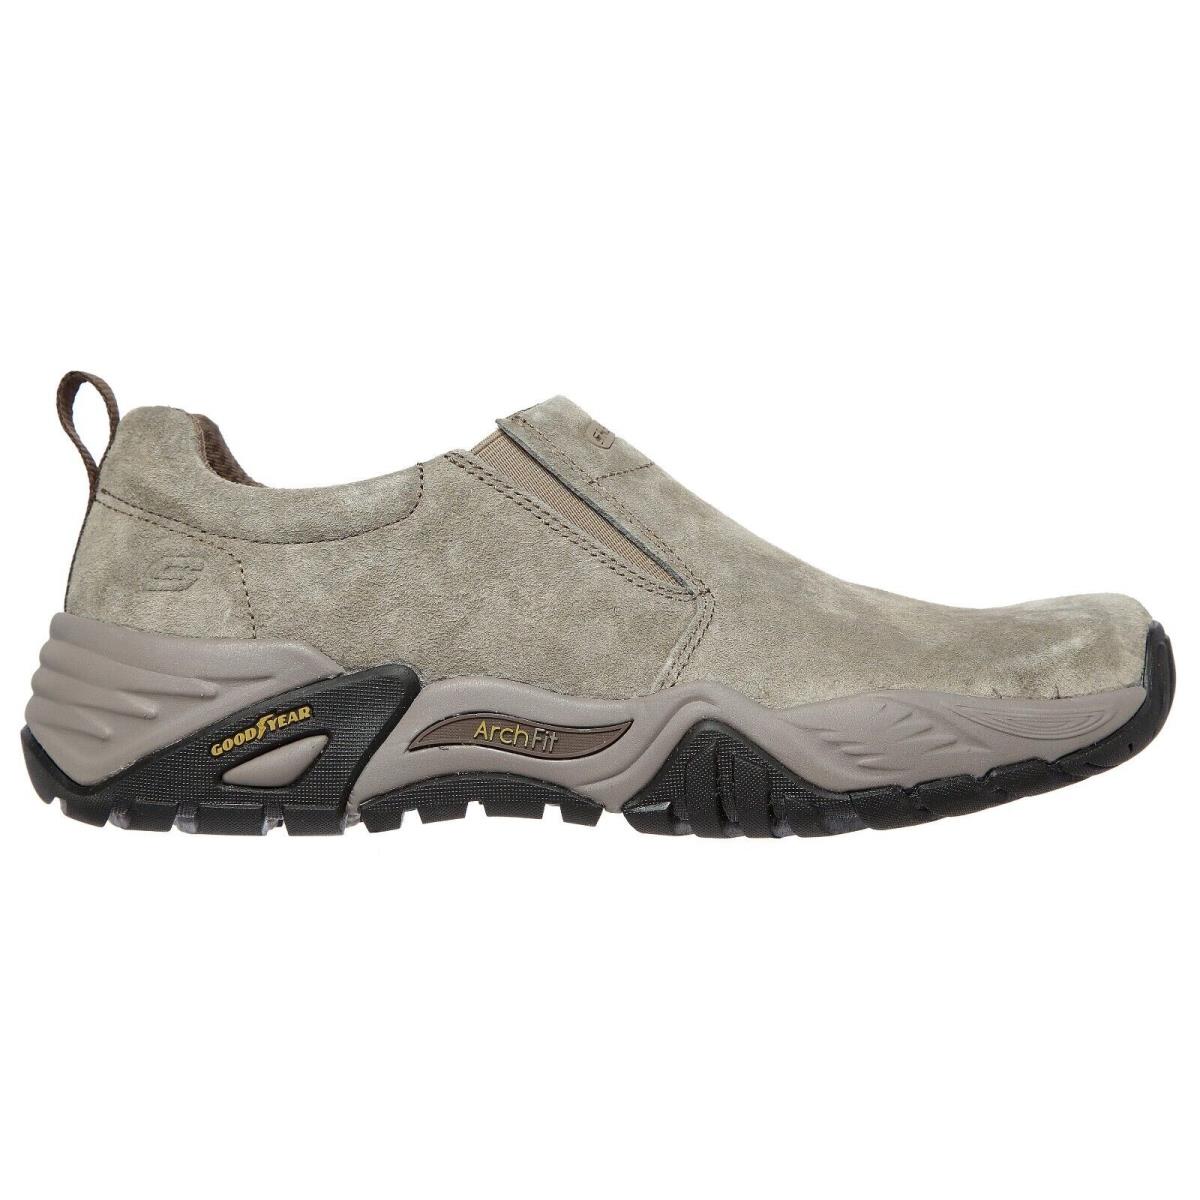 Skechers shoes Recon Sandro - Taupe 3